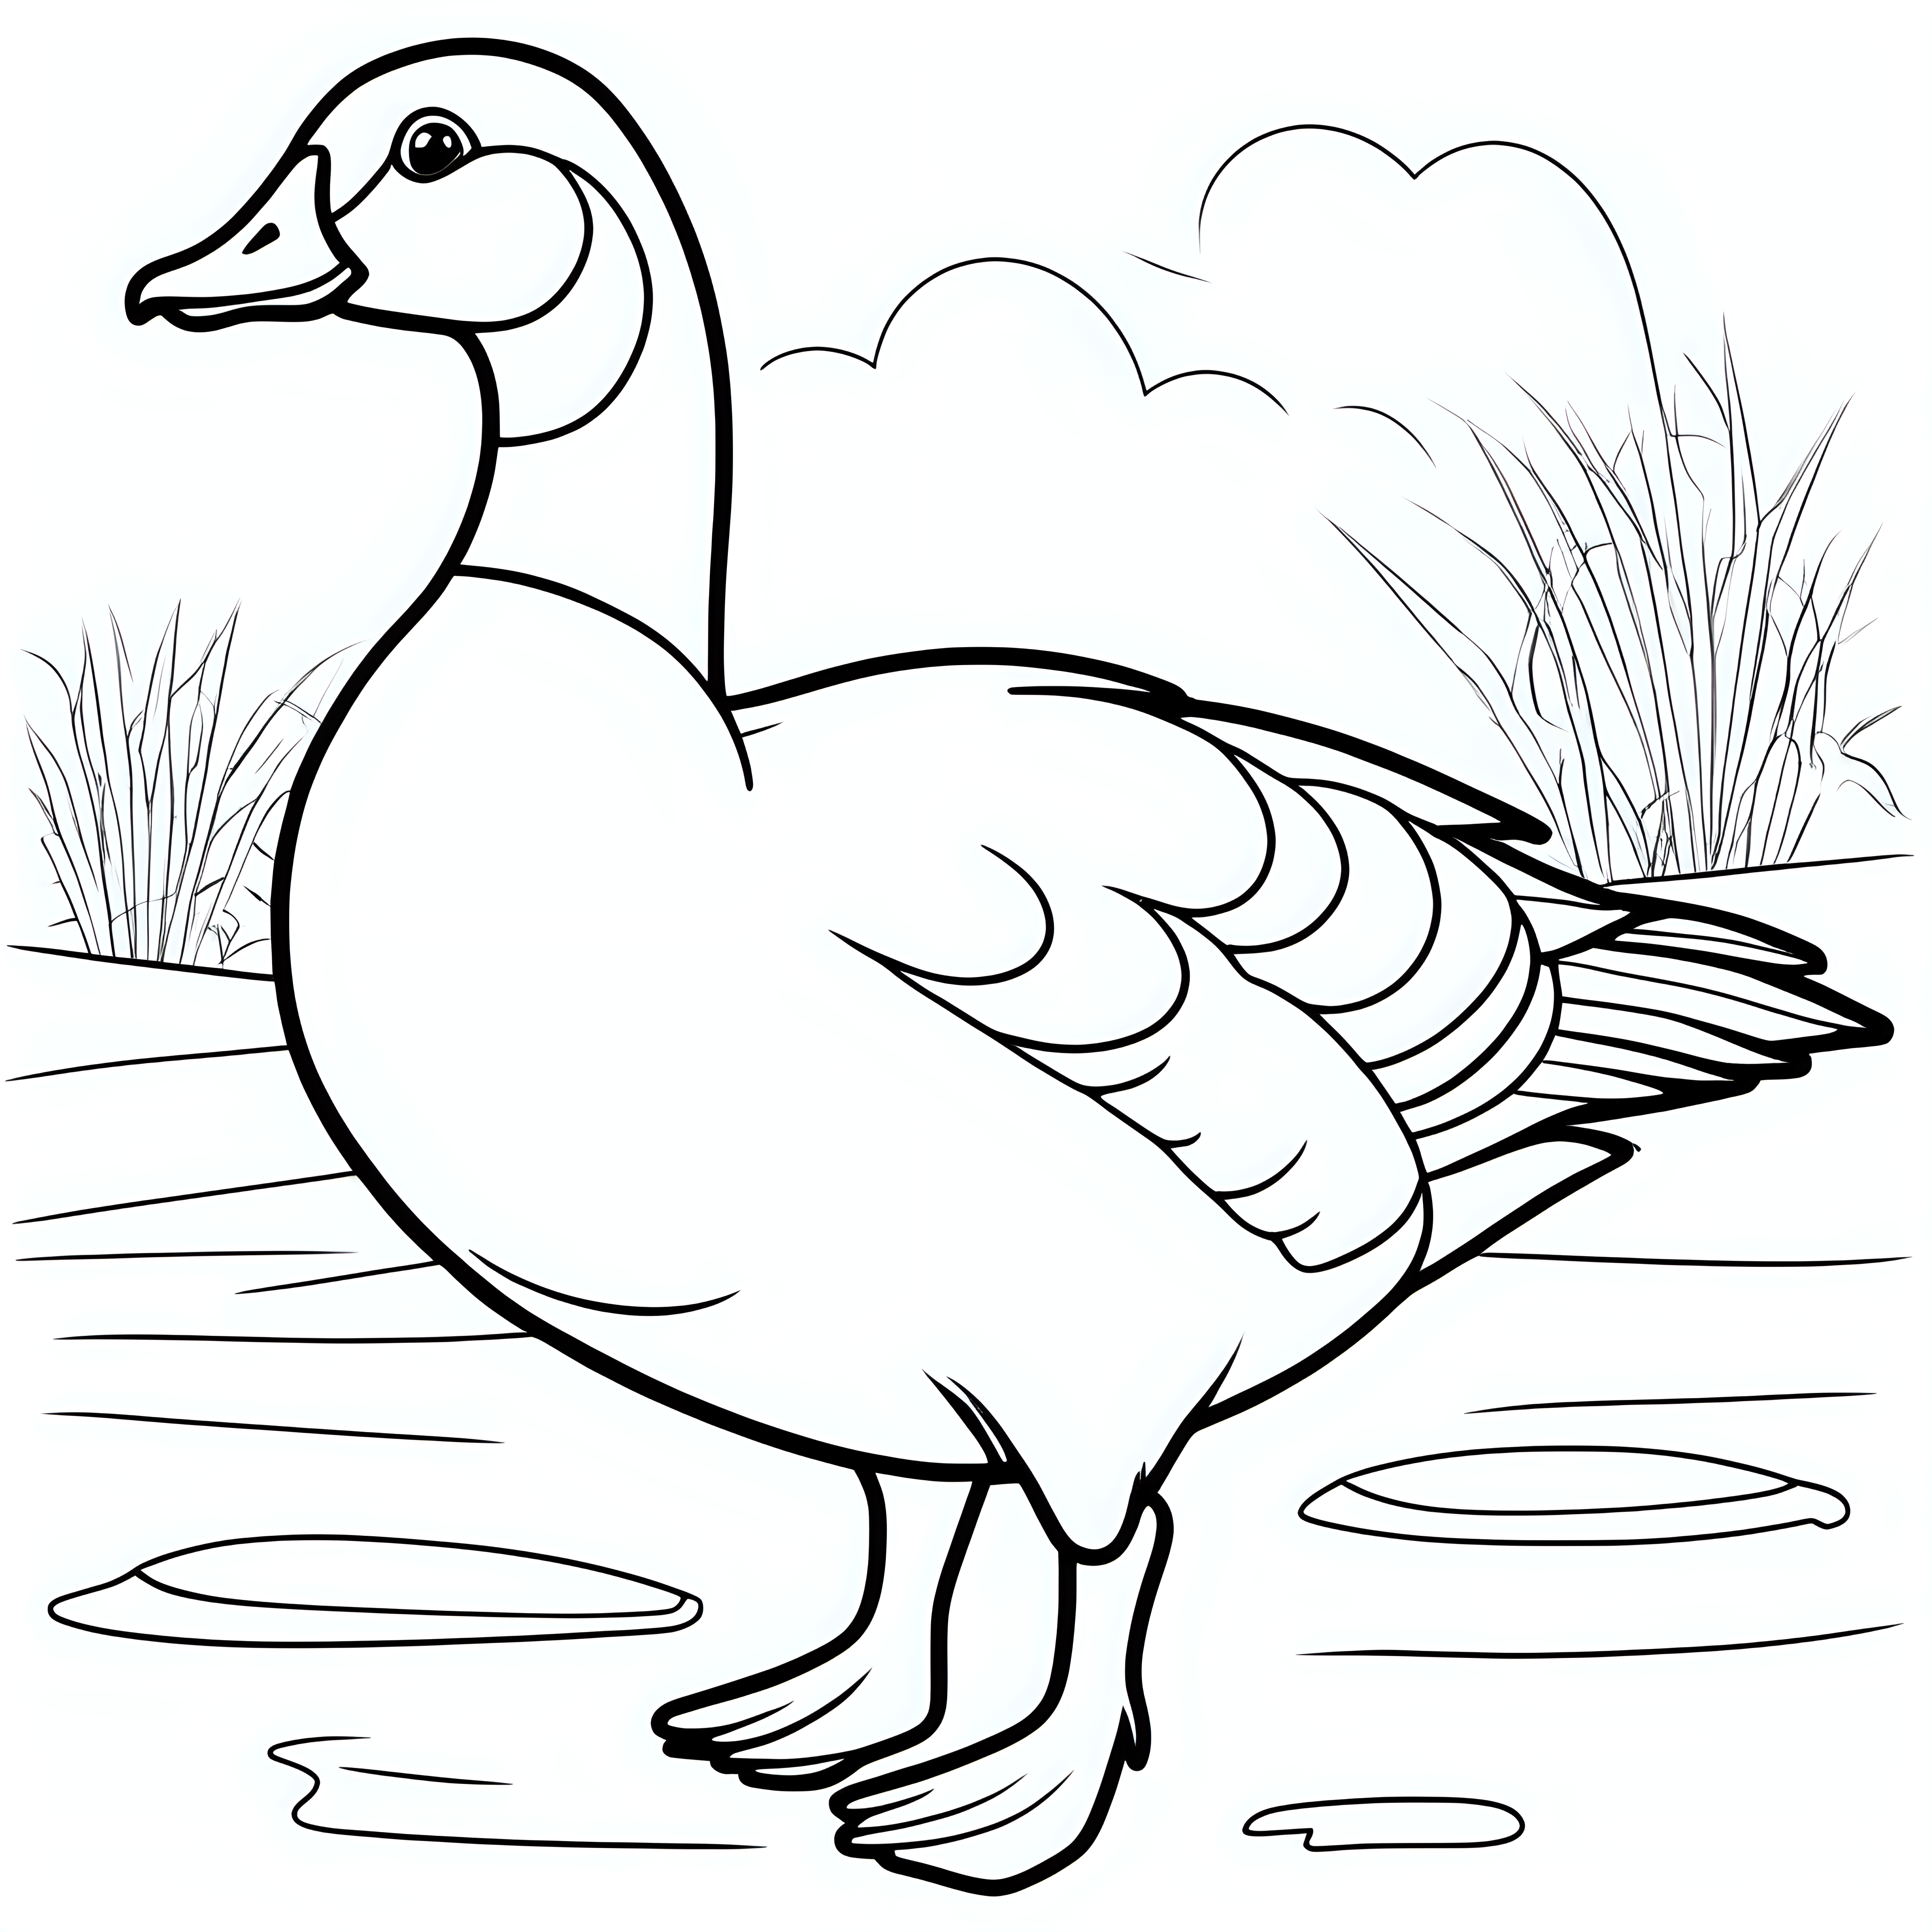 draw a cute Goose, only the outline in black,  coloring book for kids